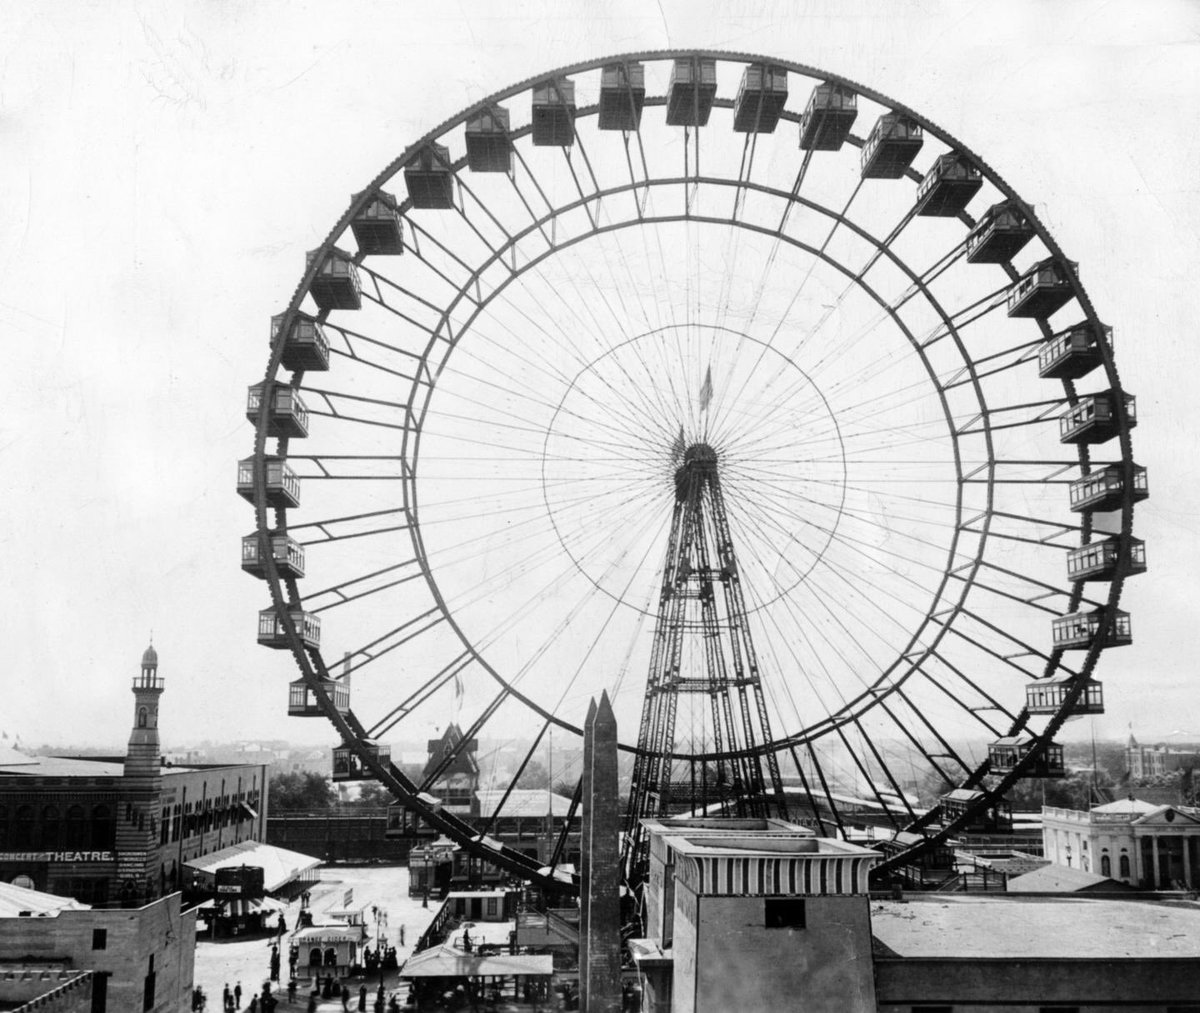 Discover the remarkable story of George Washington Gale Ferris Jr., the brilliant inventor behind the iconic Ferris Wheel. From humble beginnings to engineering genius, his legacy continues to thrill and inspire. #FerrisWheel #Inventor #EngineeringGenius

seattlehistoryblog.com/2023/06/17/geo…